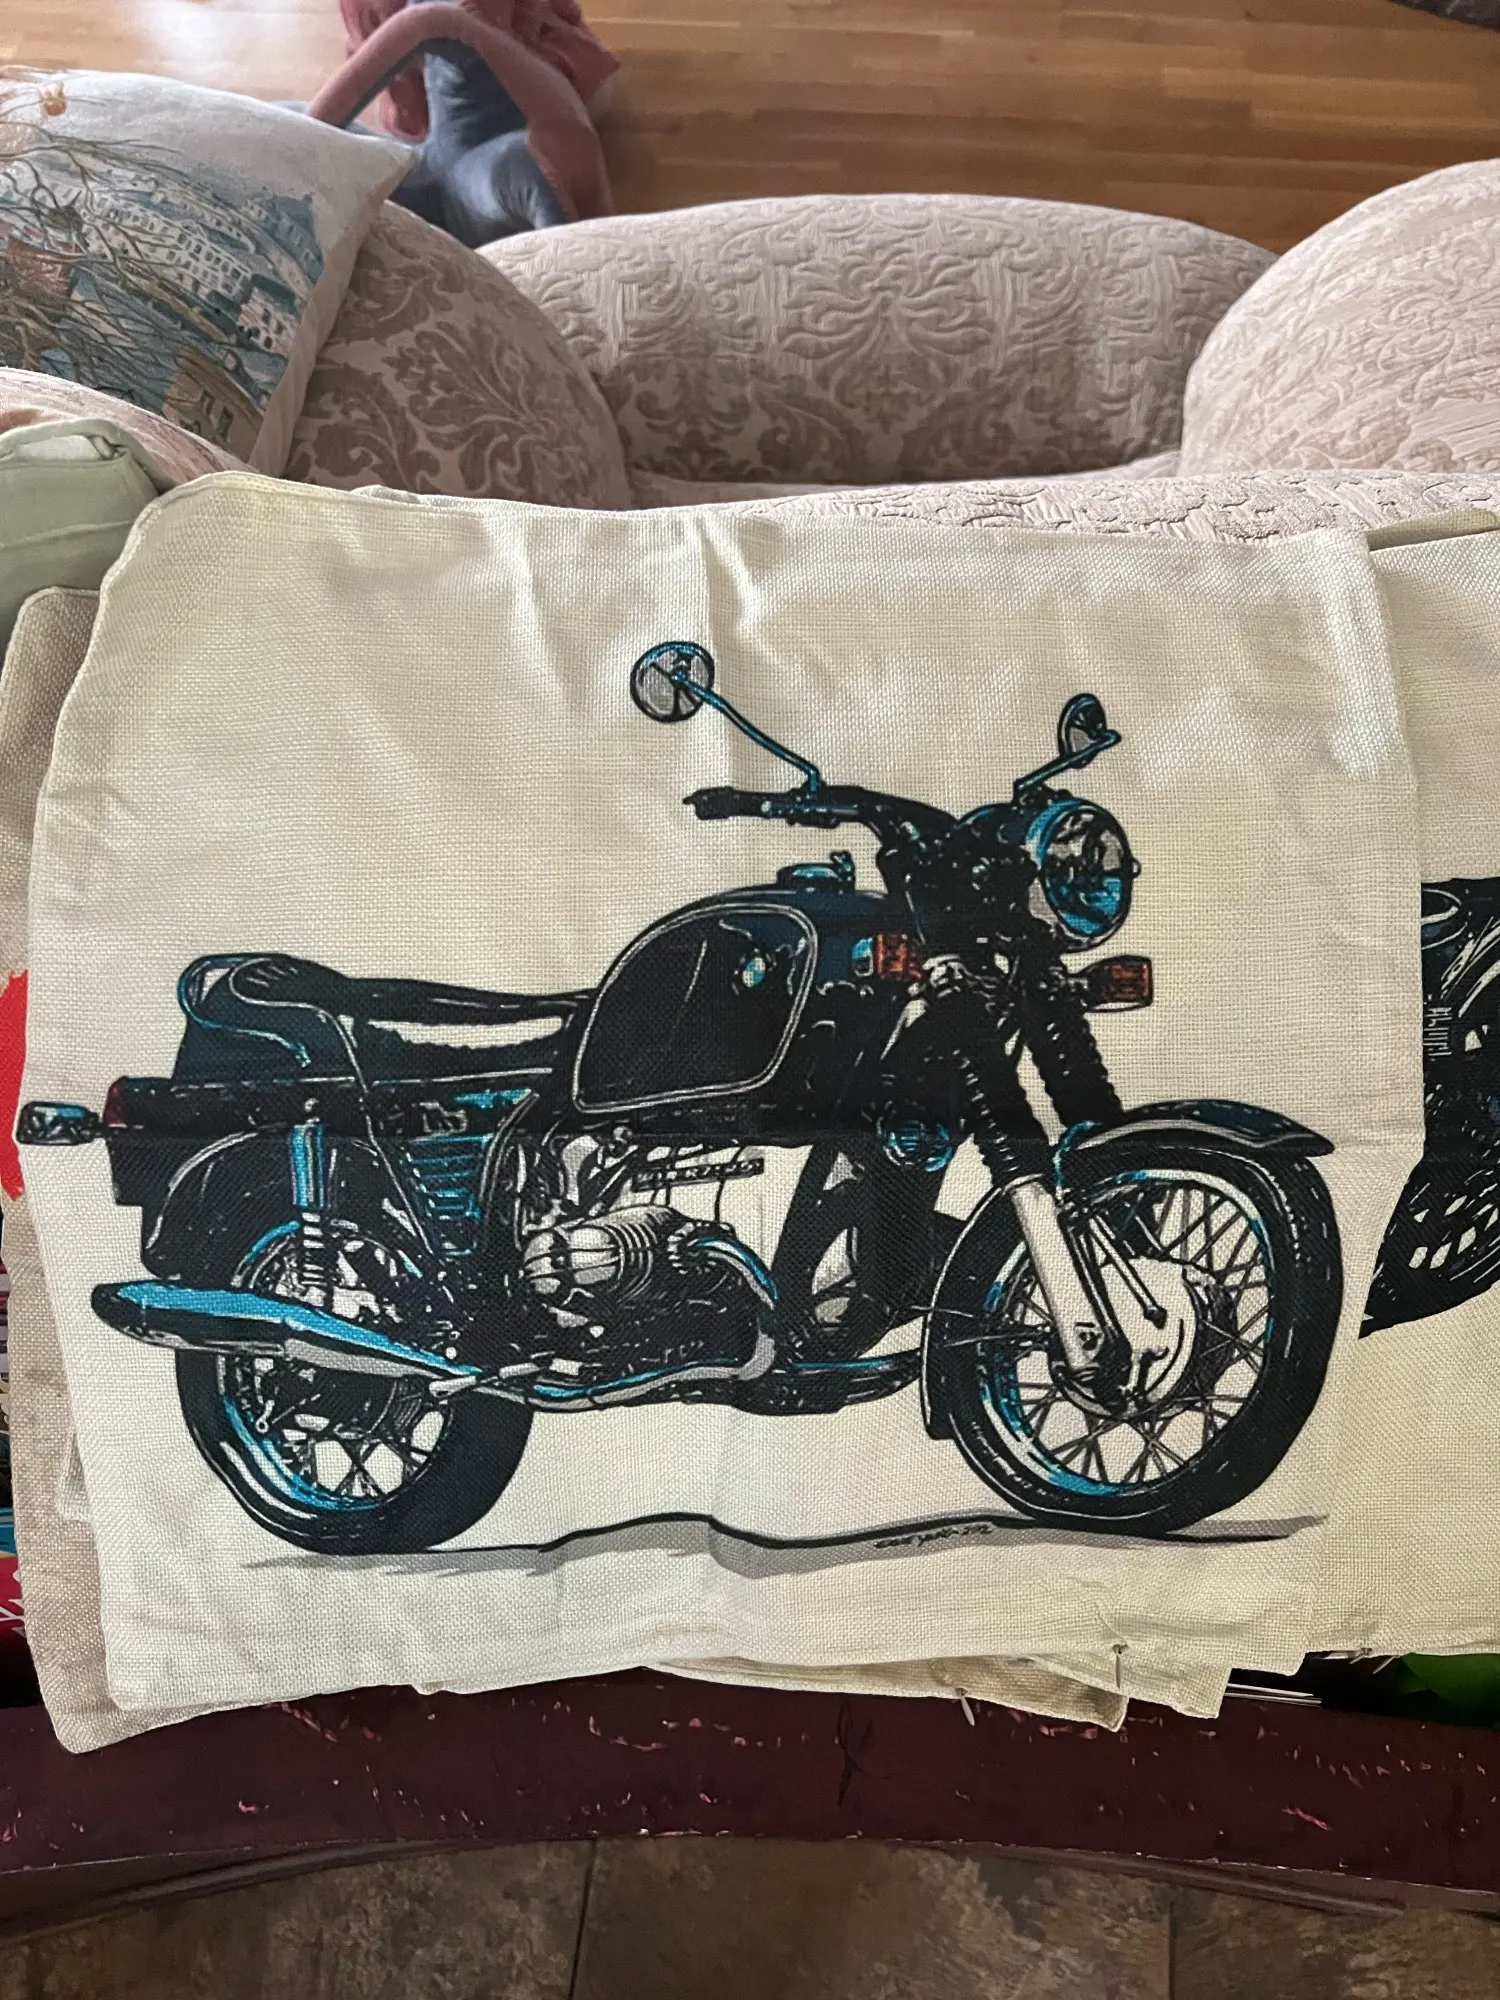 Vintage Motorcycle Pillow Case Motorbike Cushion Cover 45x45cm Throw Pillow Case